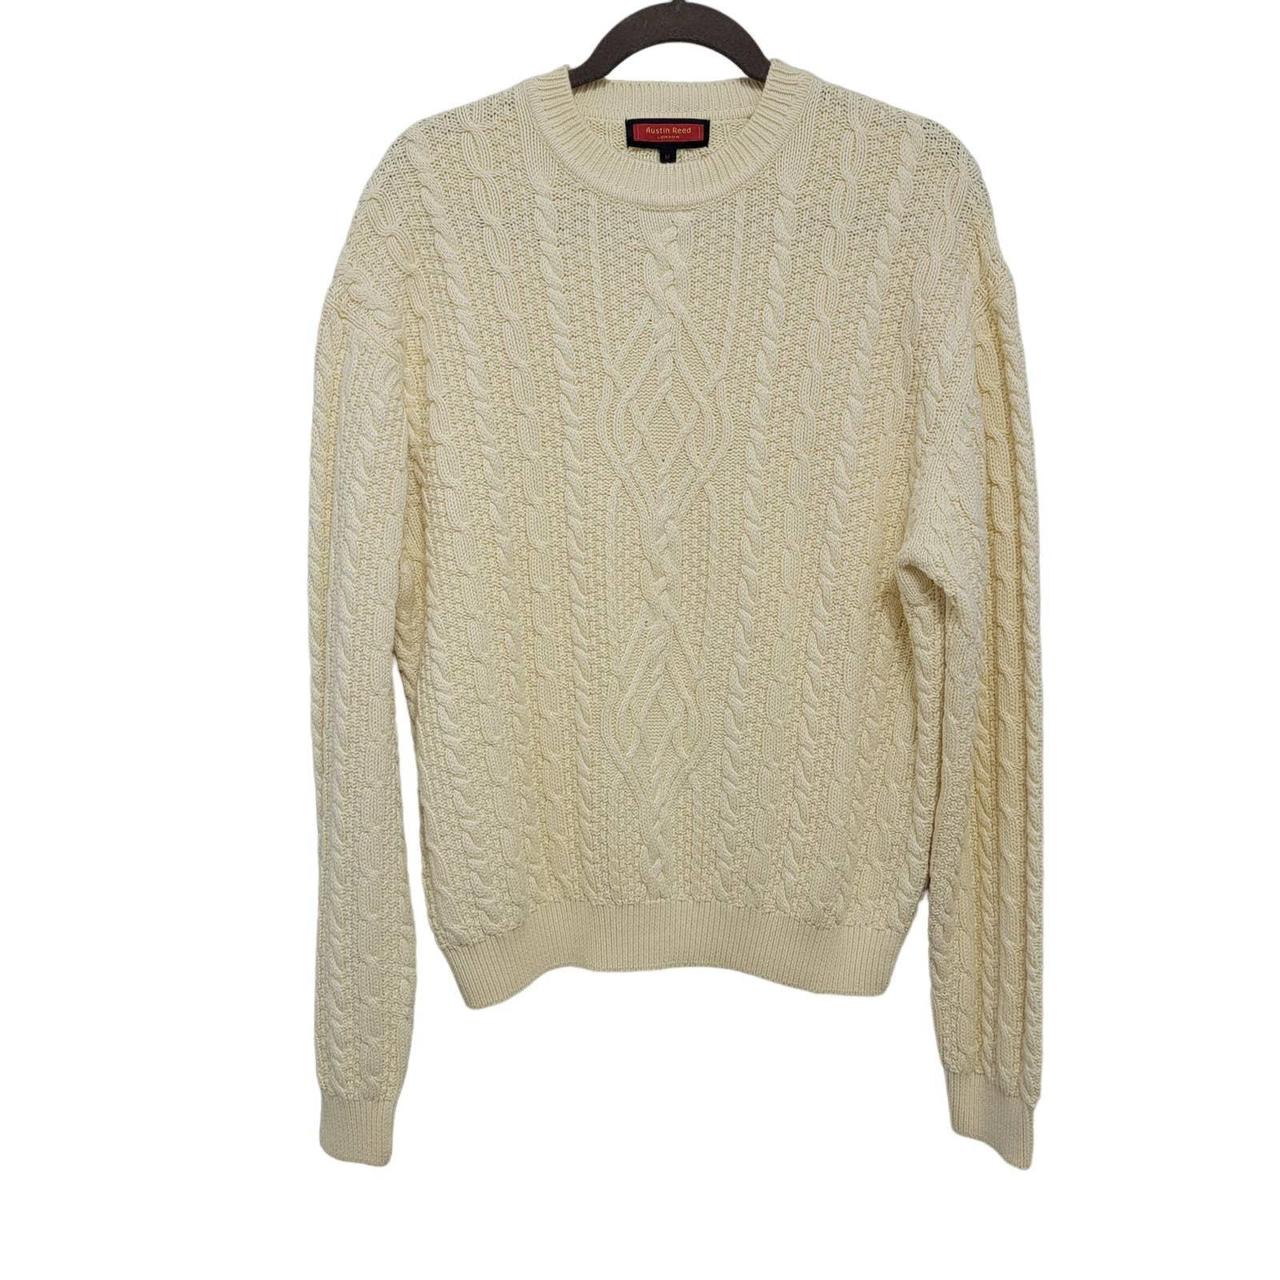 724-A cute cream/ off white cable knit pullover by... - Depop